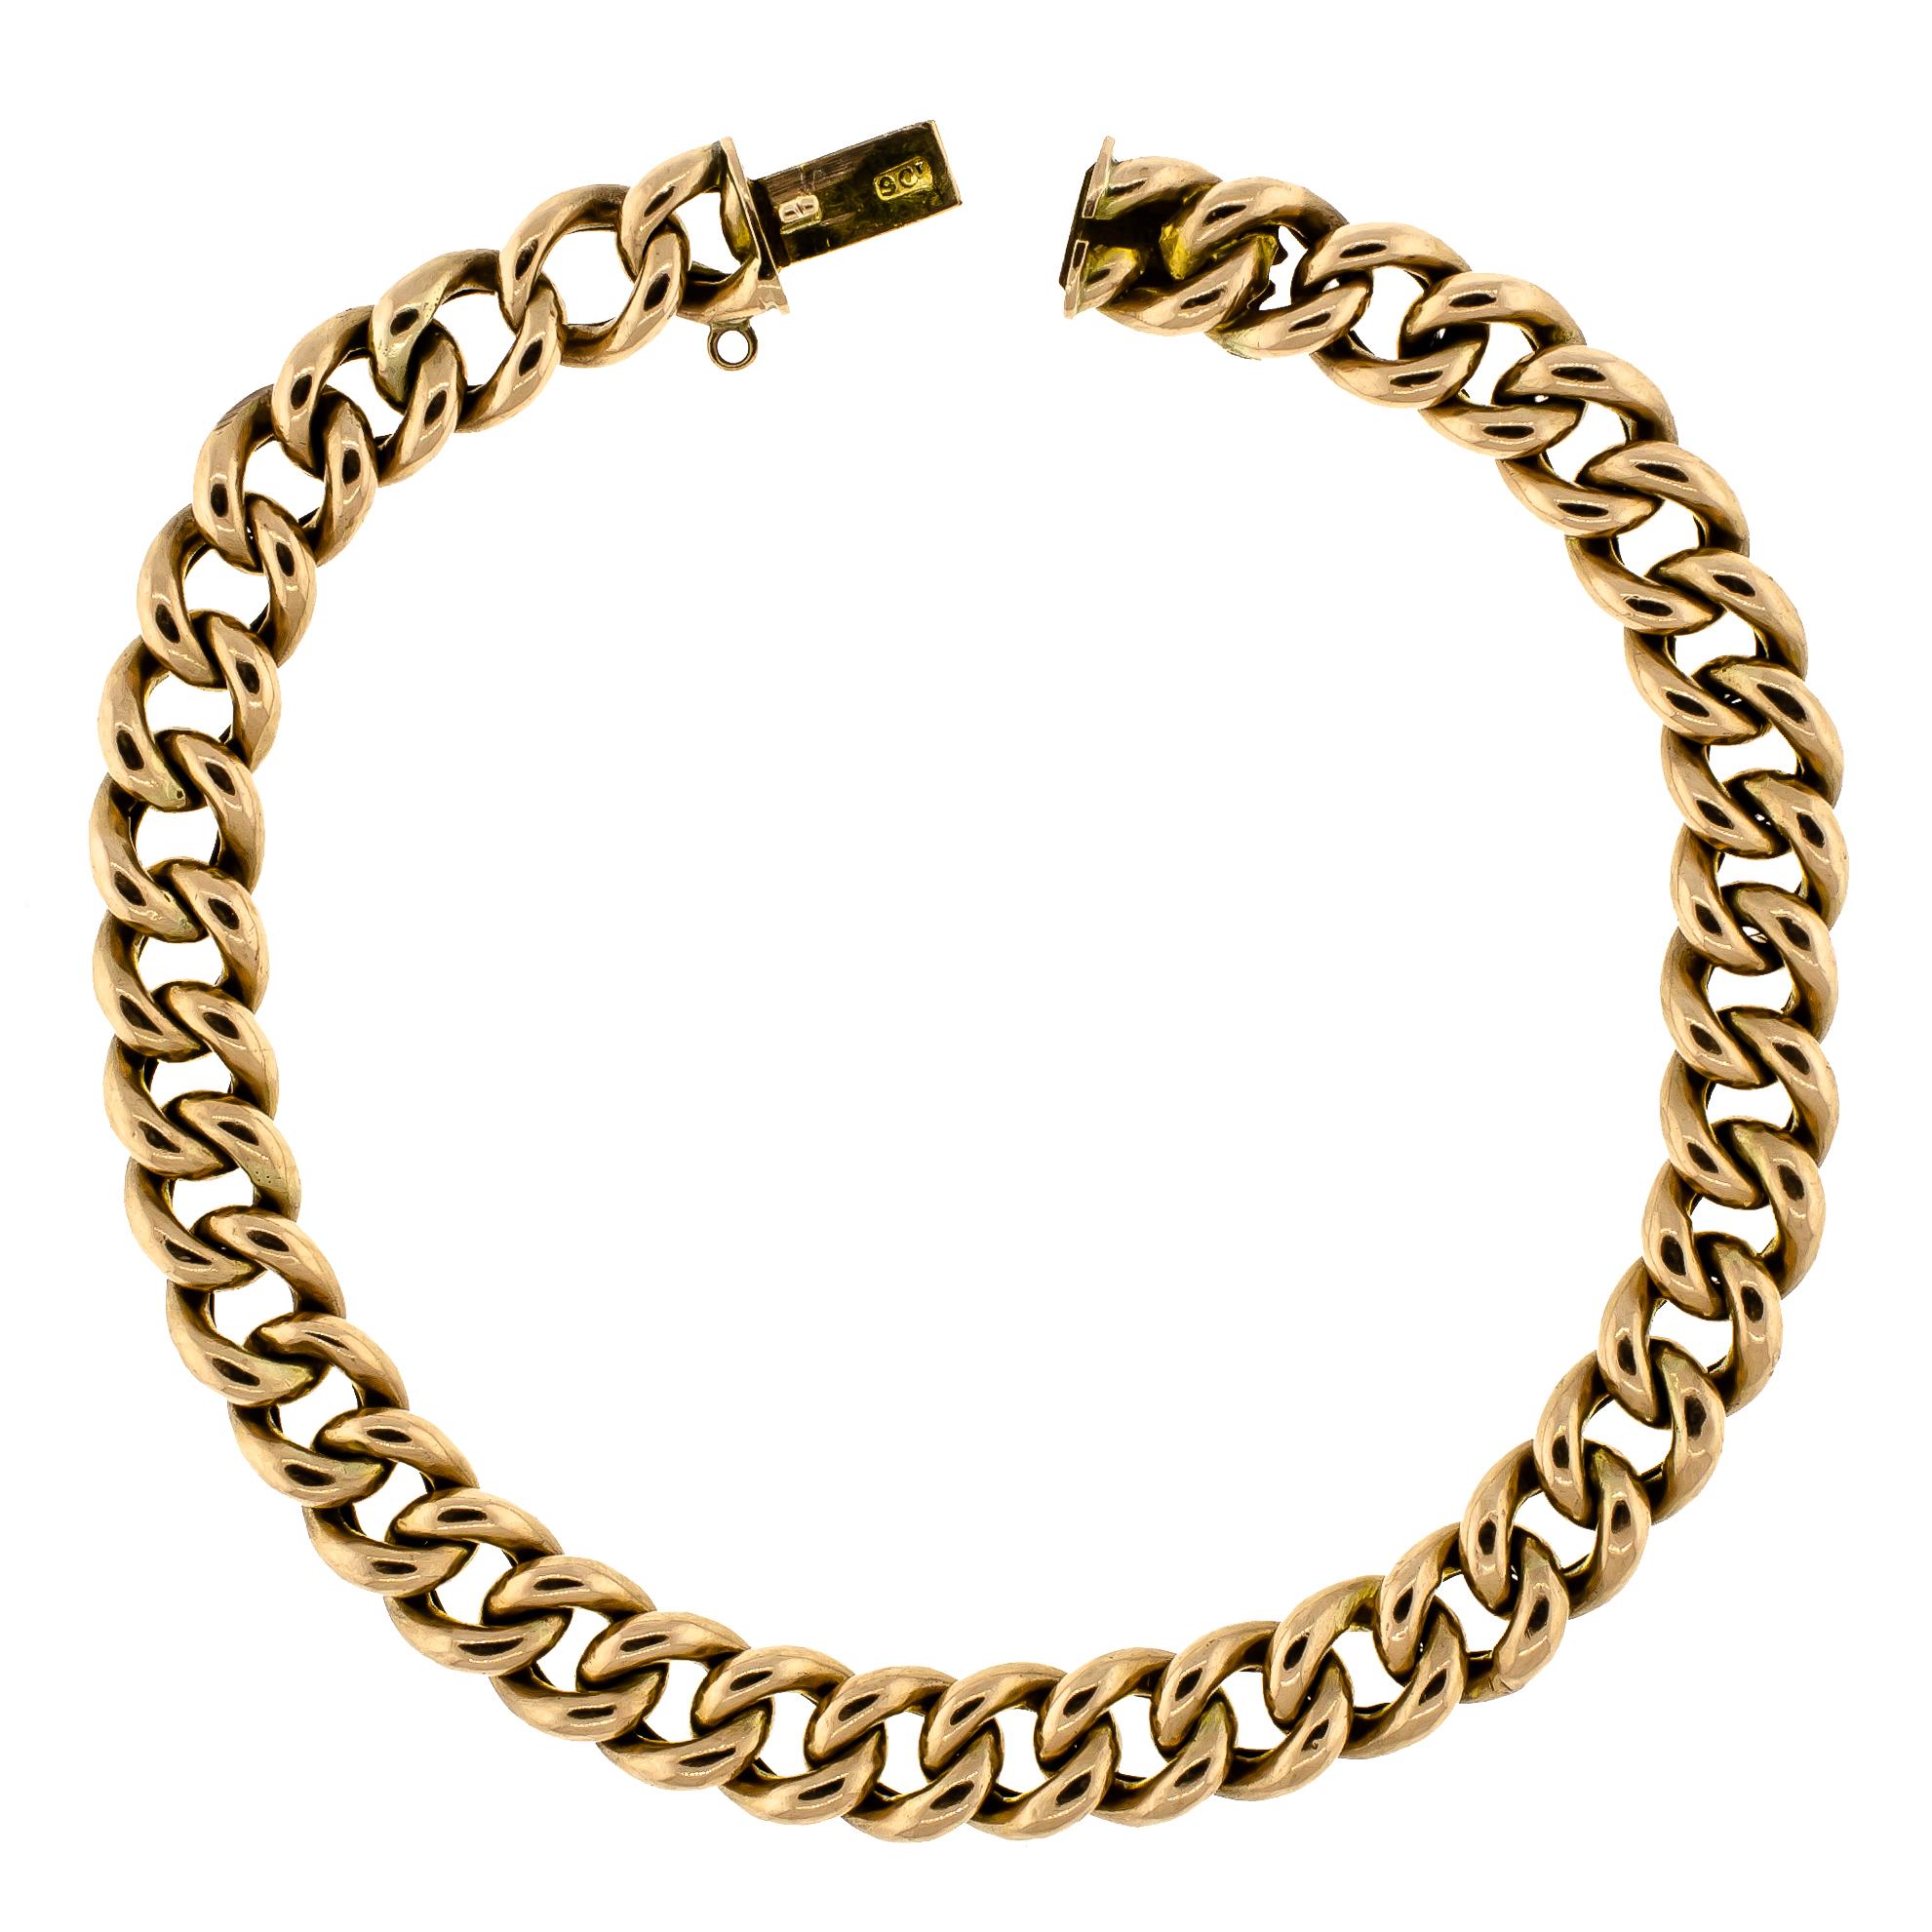 Antique English 9ct yellow gold curb-link bracelet with concealed box link clasp measuring approximately 8 1/4